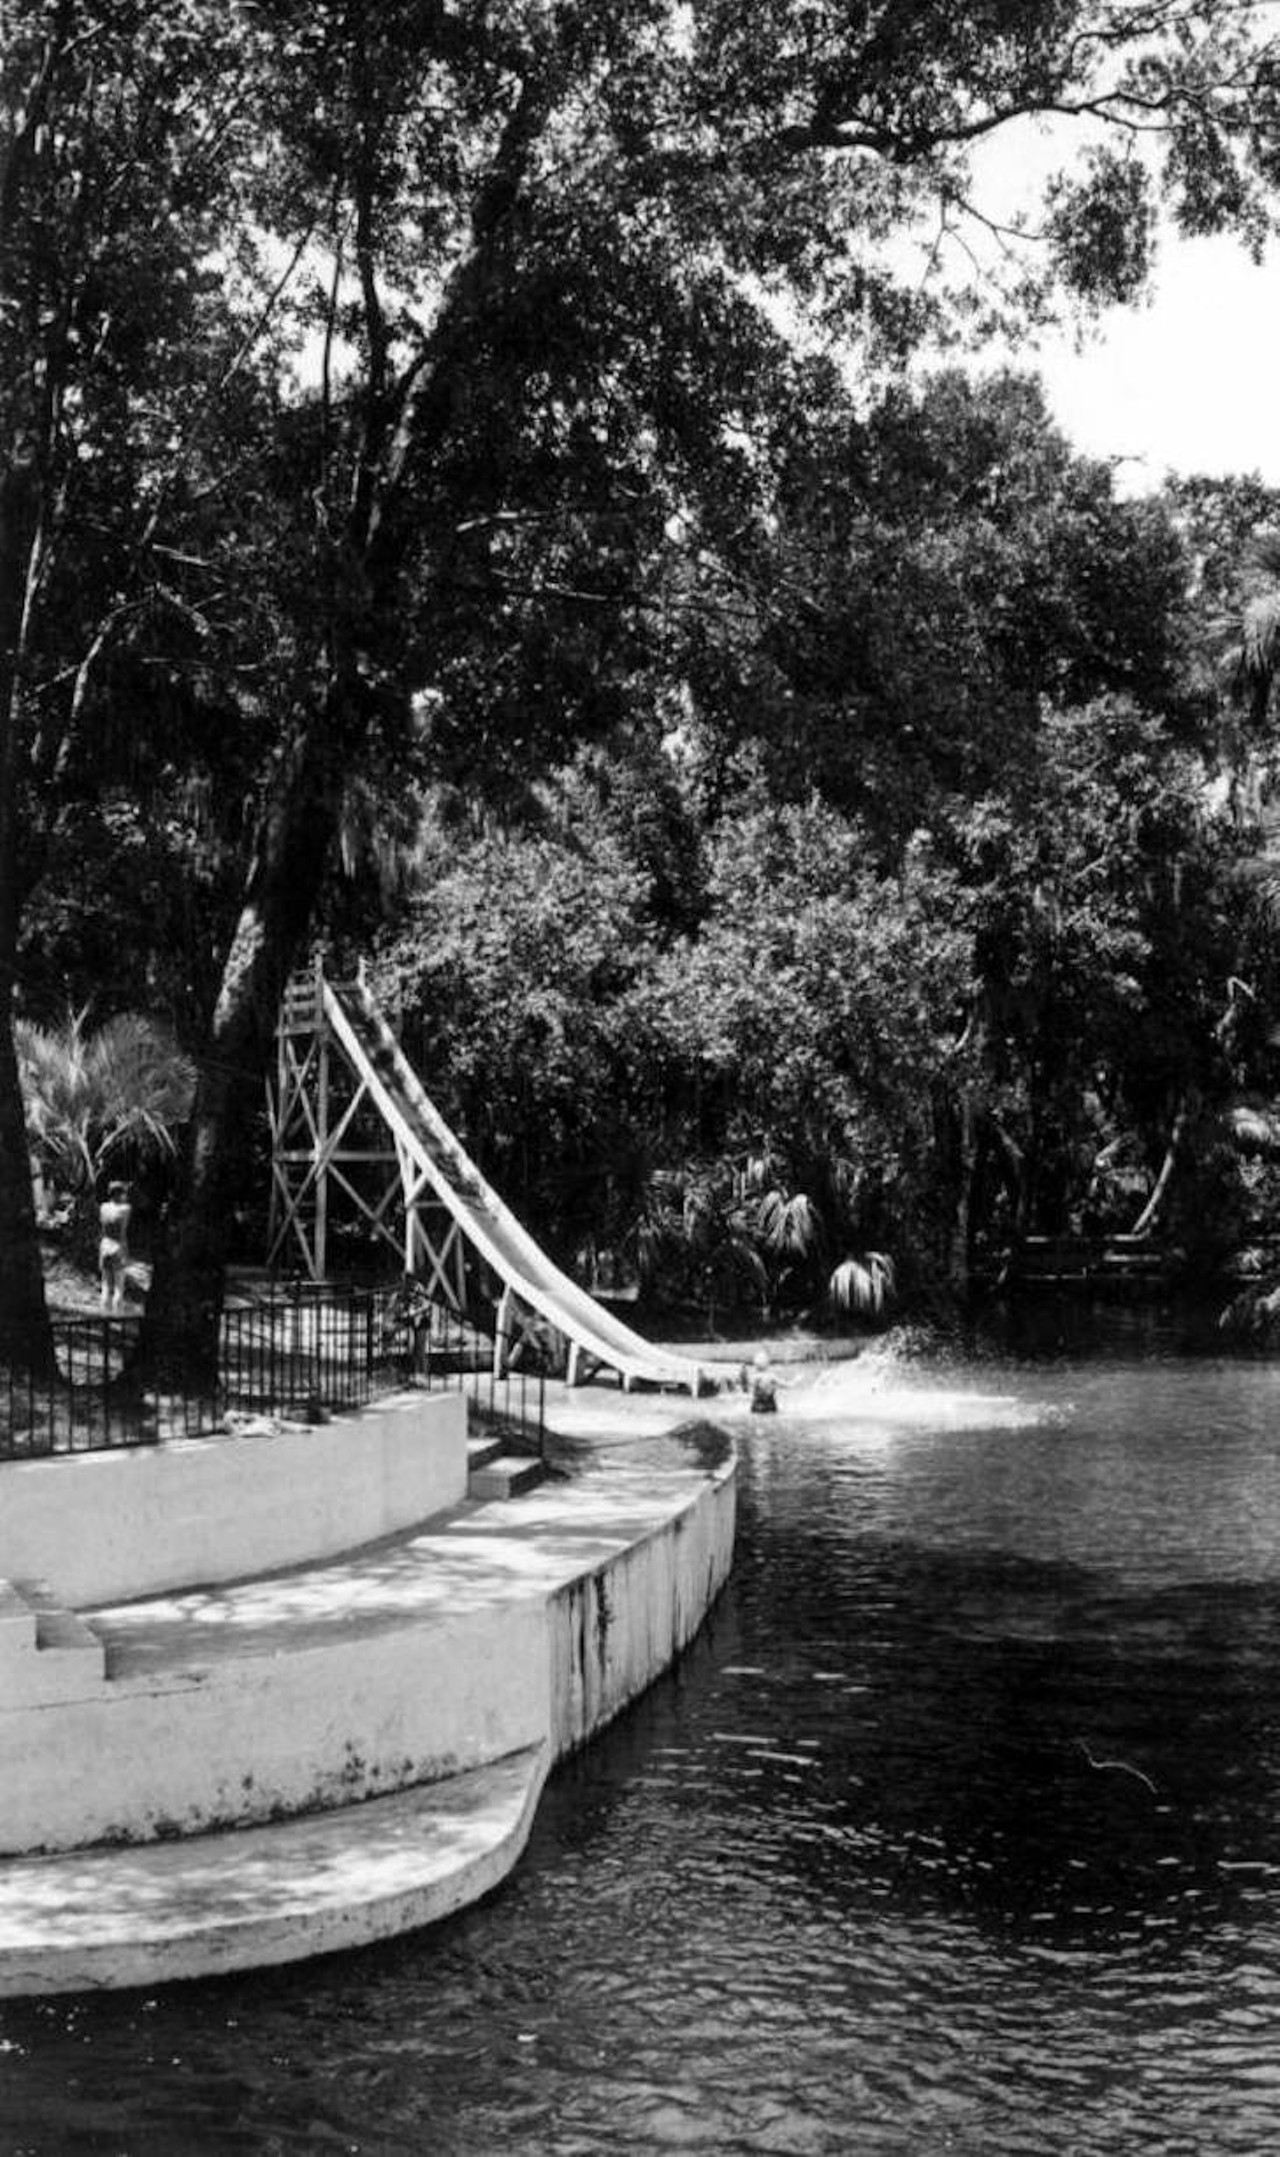 View of the springs and the water slide - Sanlando Springs, 1946.